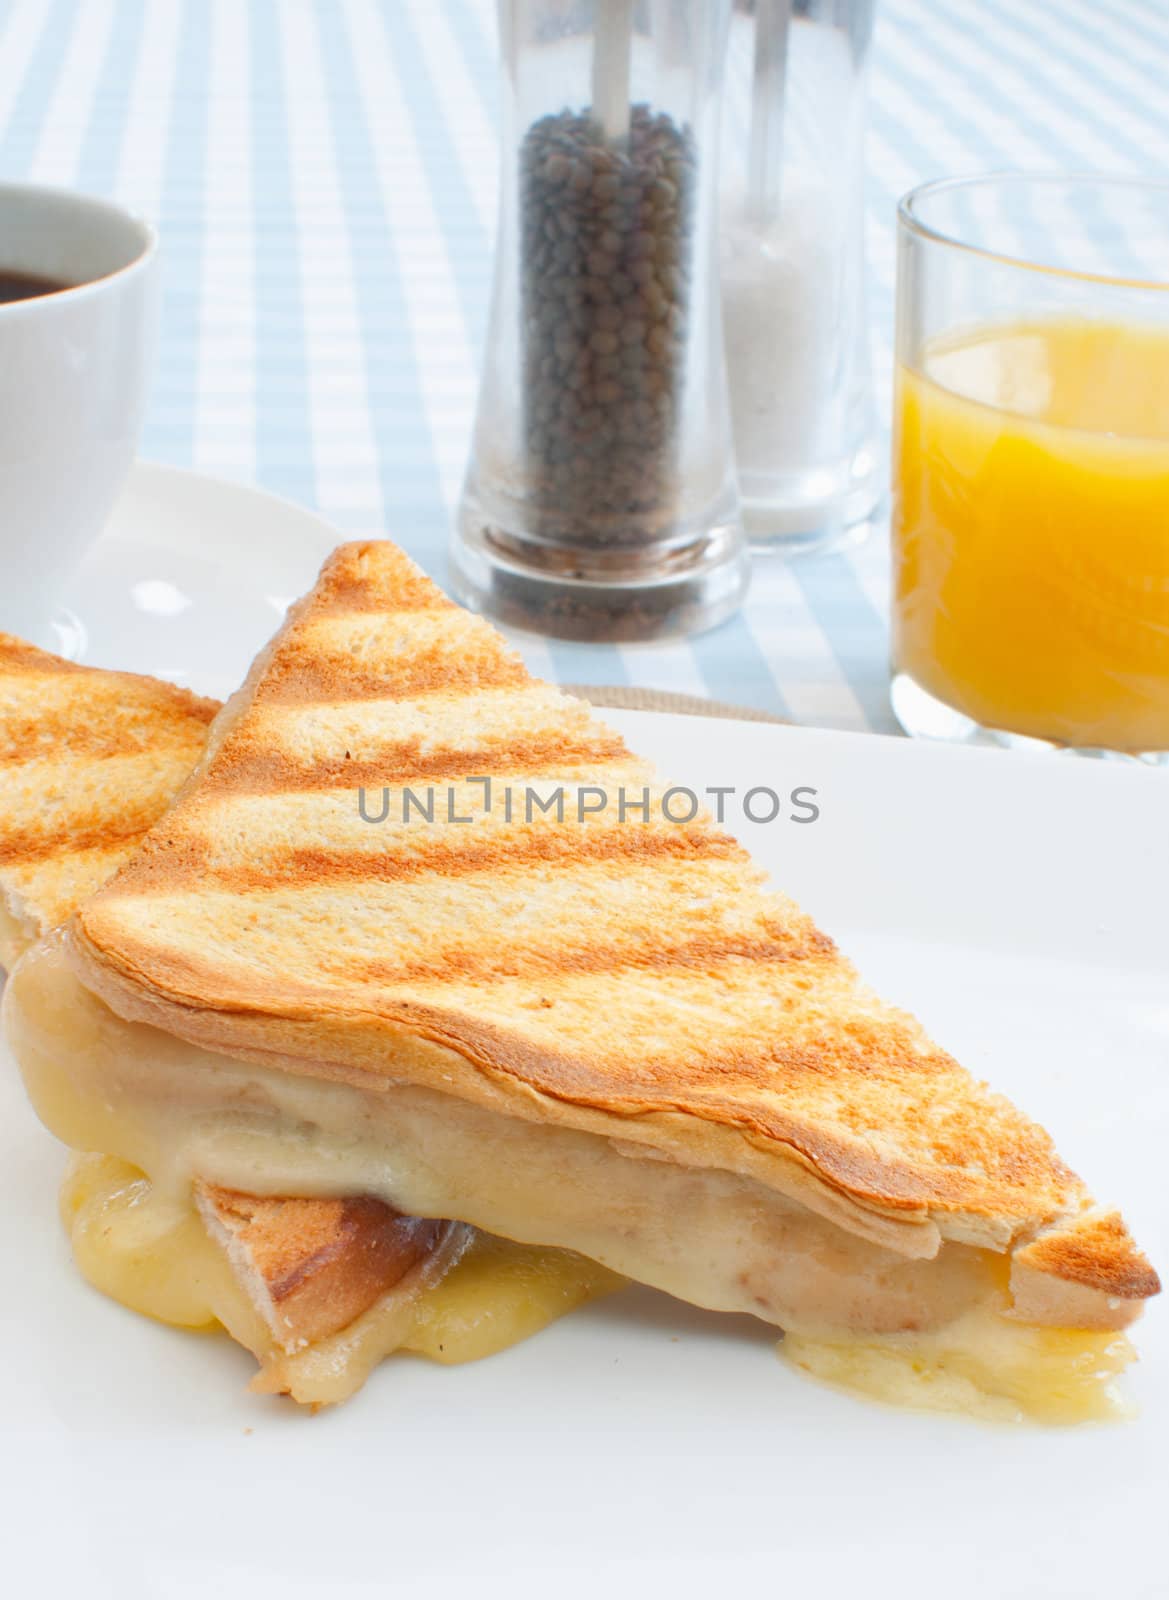 Toasted sandwich with melted cheese